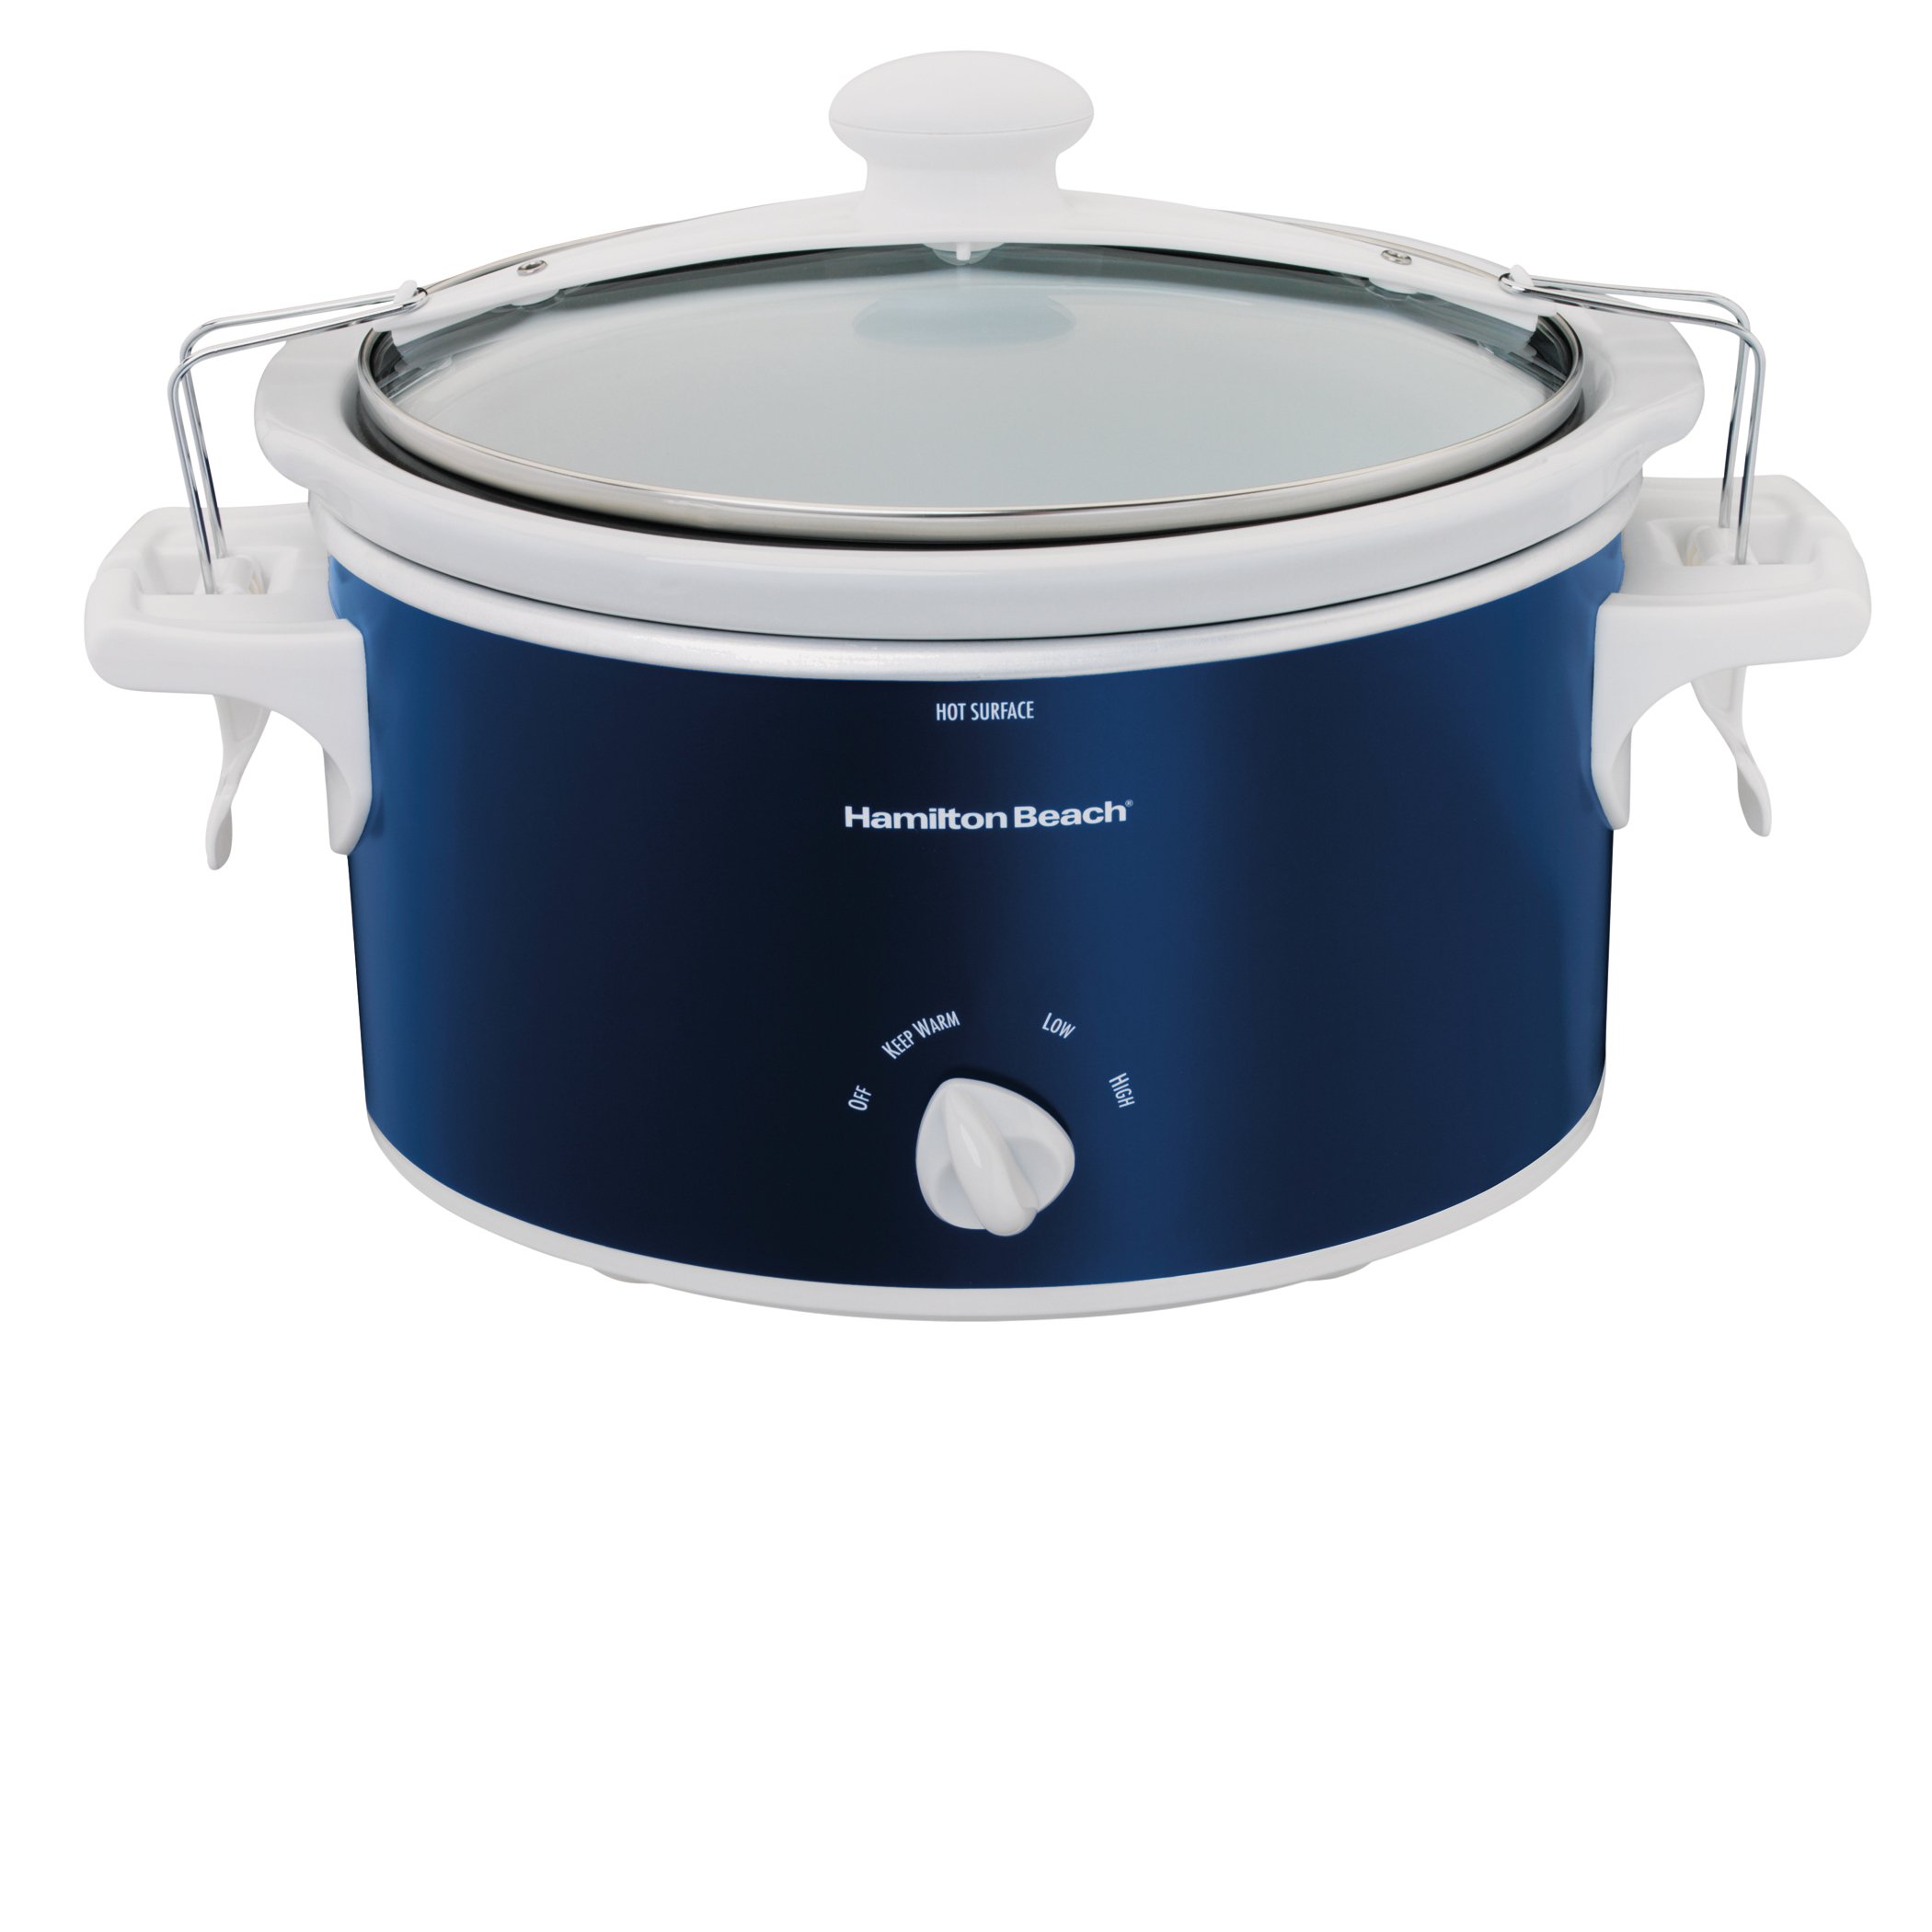 Hamilton Beach 4 Quart Stay or Go Slow Cooker Blue - Shop Cookers